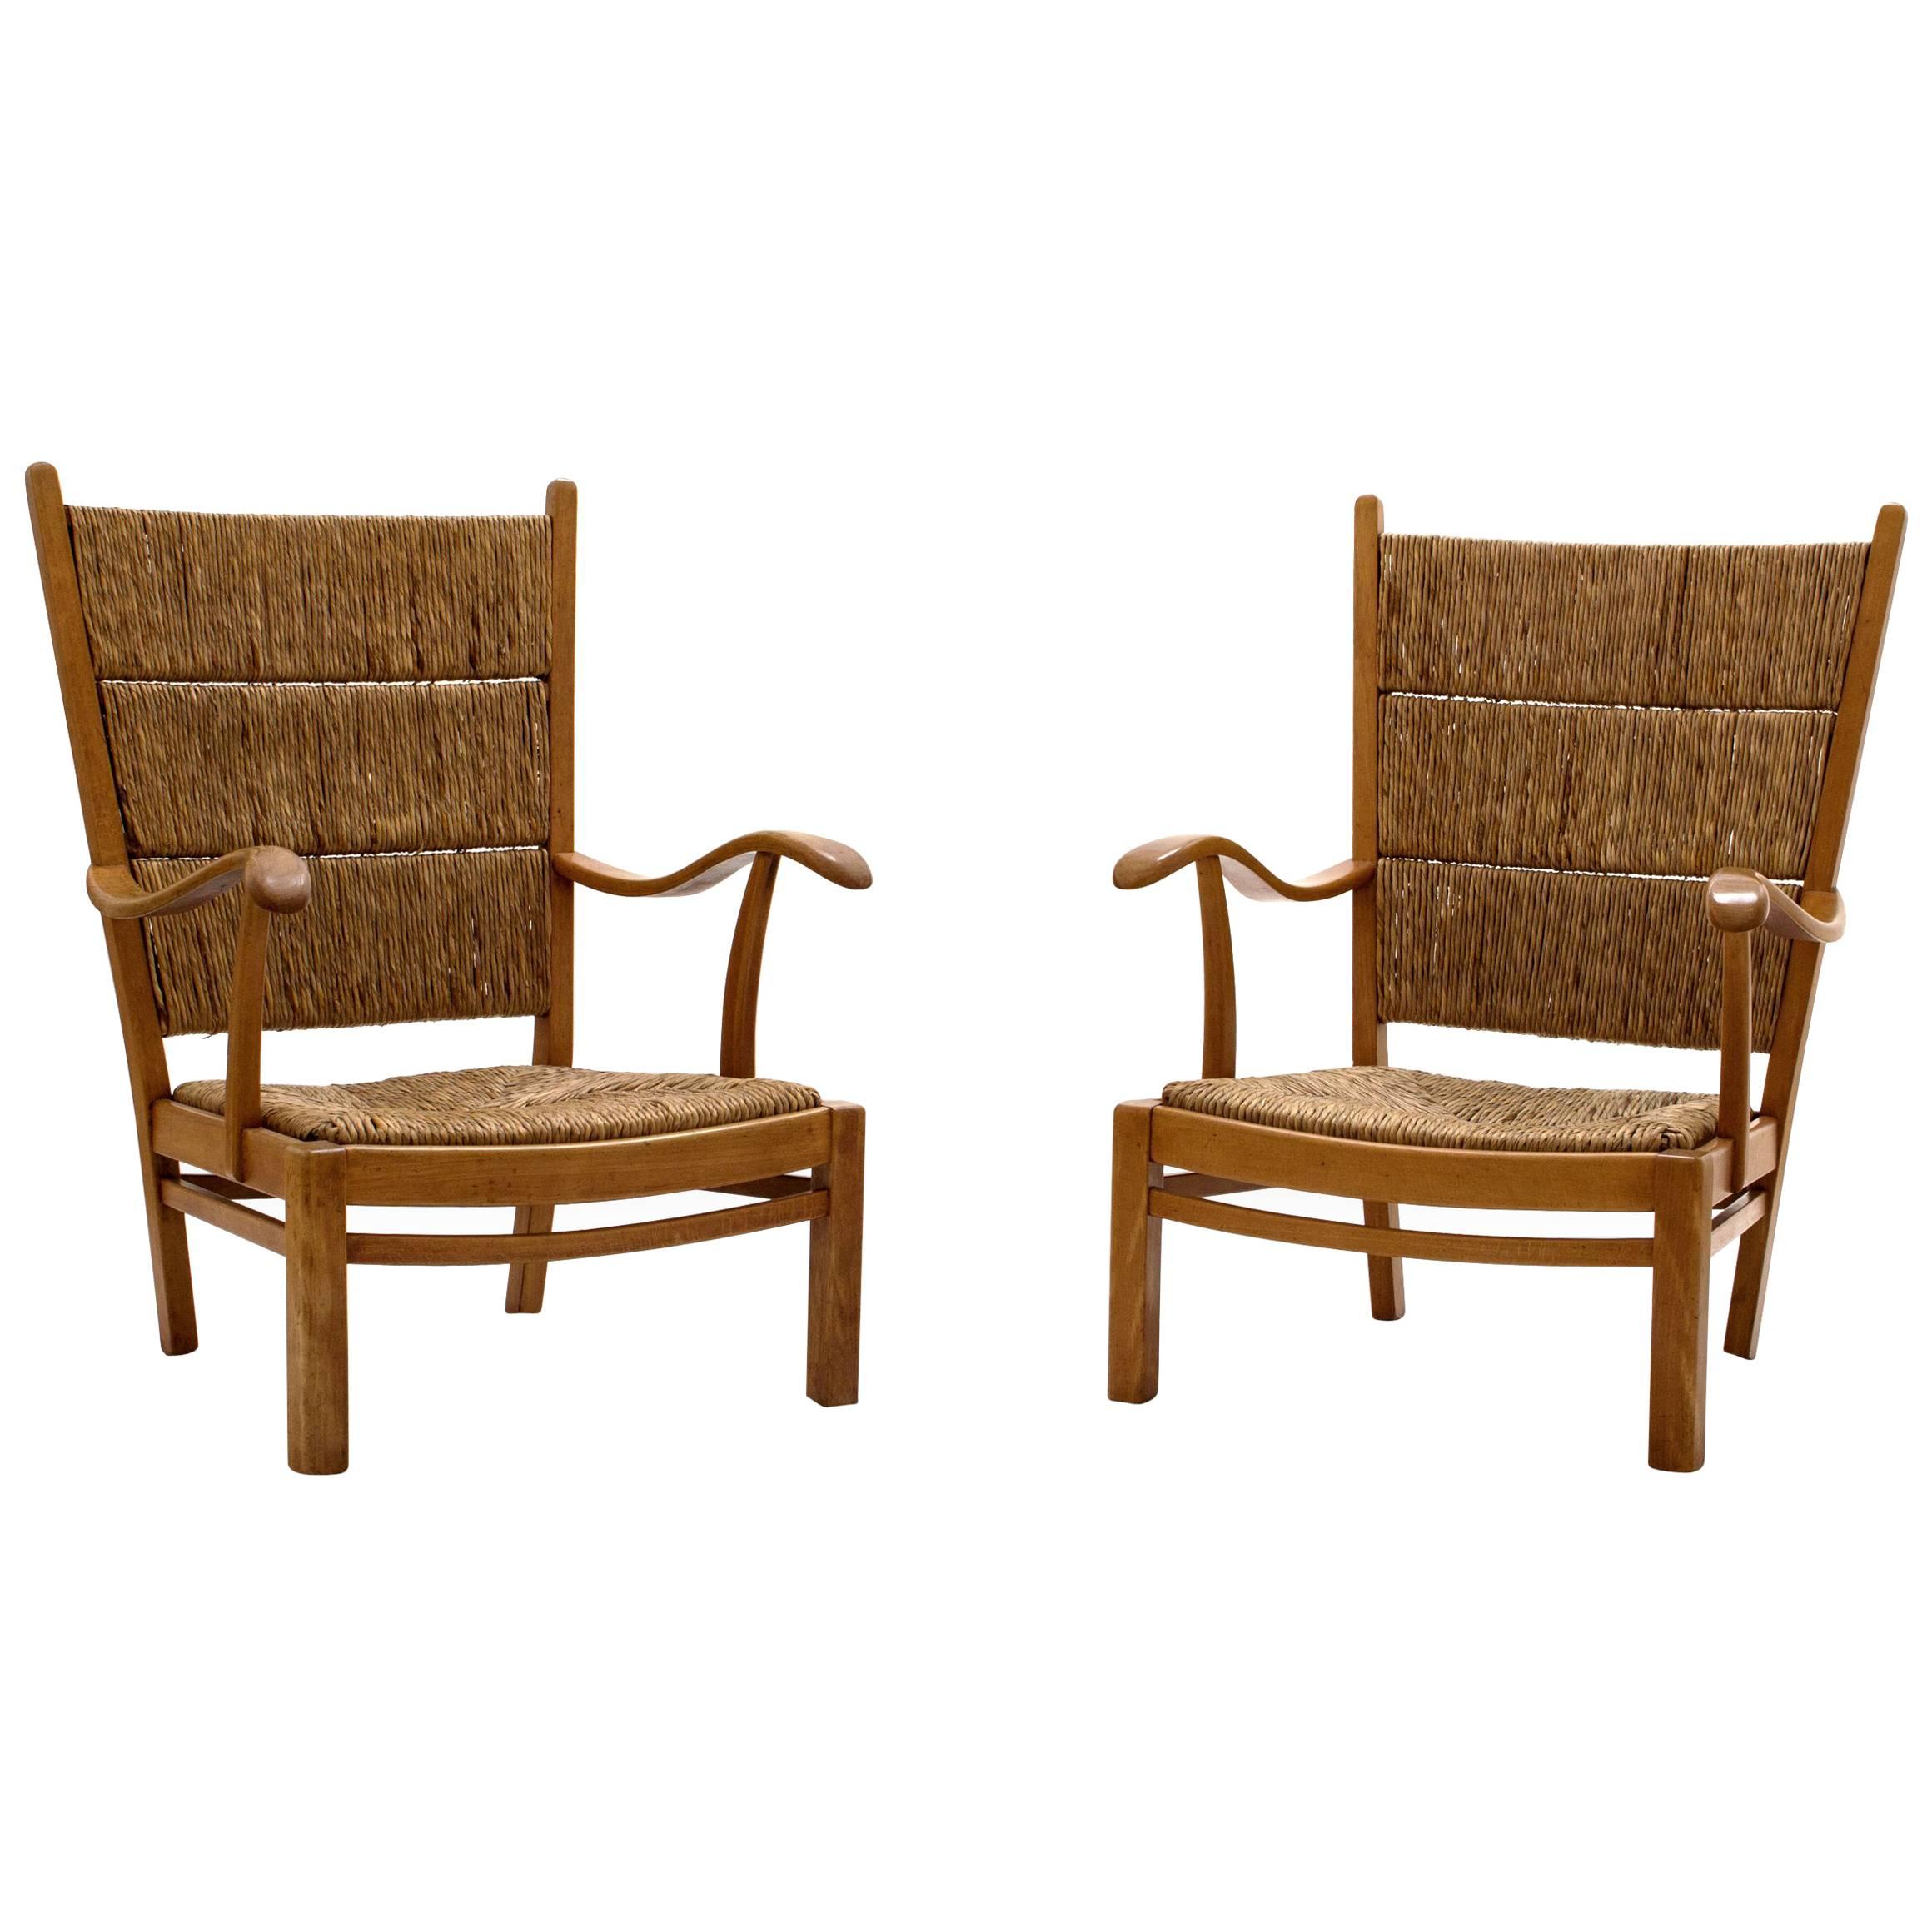 Mid-Century Armchairs in Beech and Straw, the Netherlands 1940s